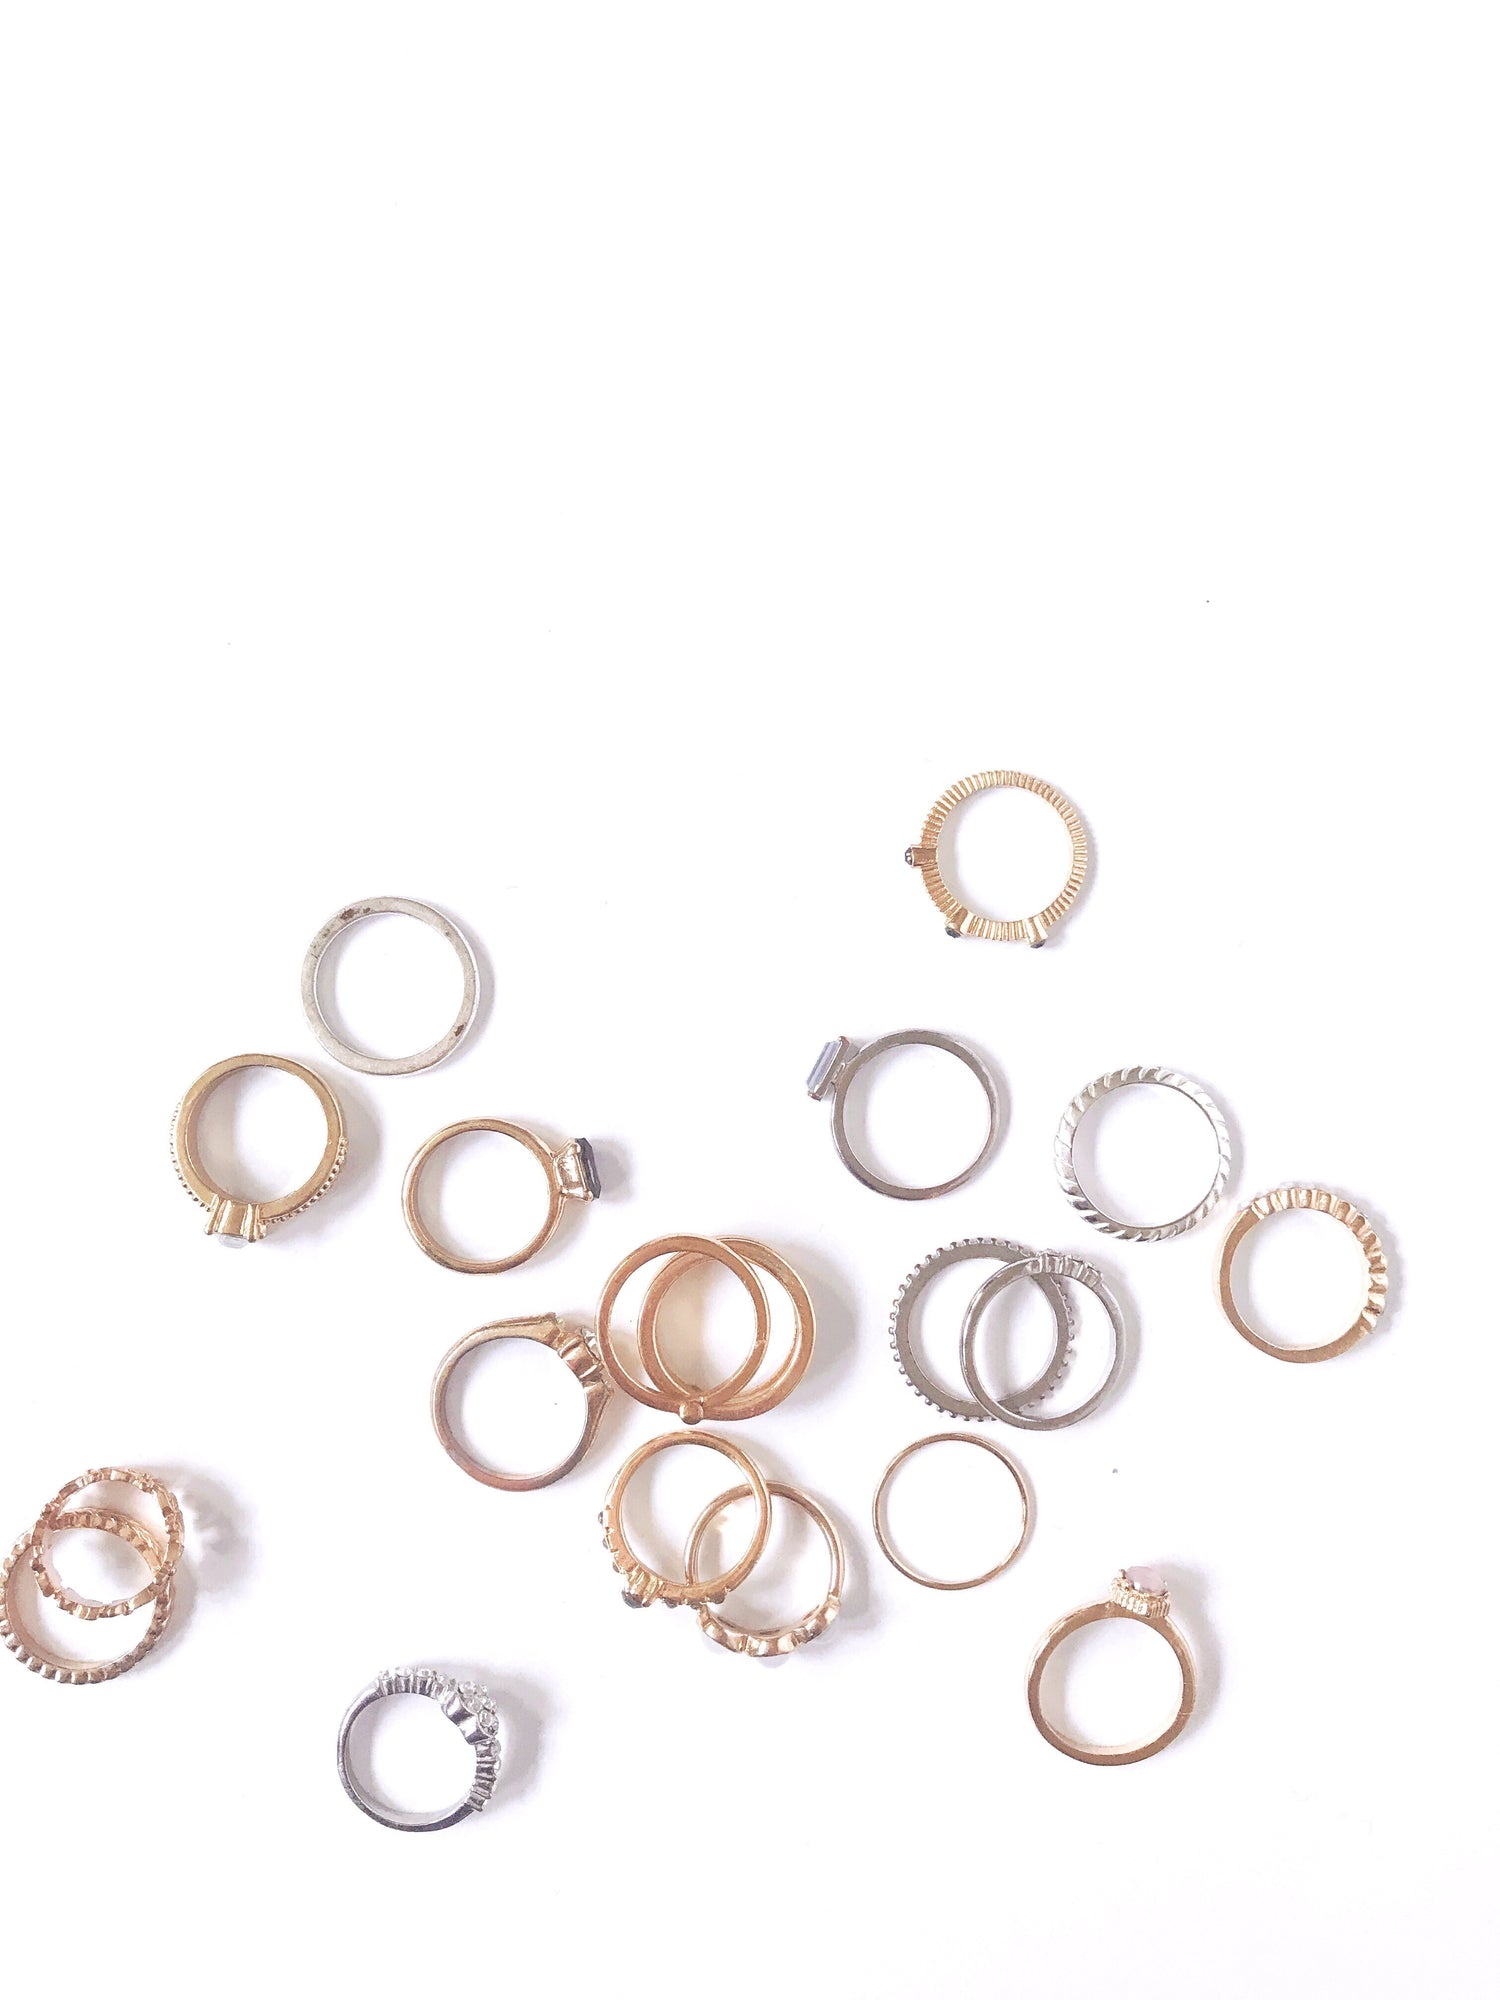 top view of different rings in various designs